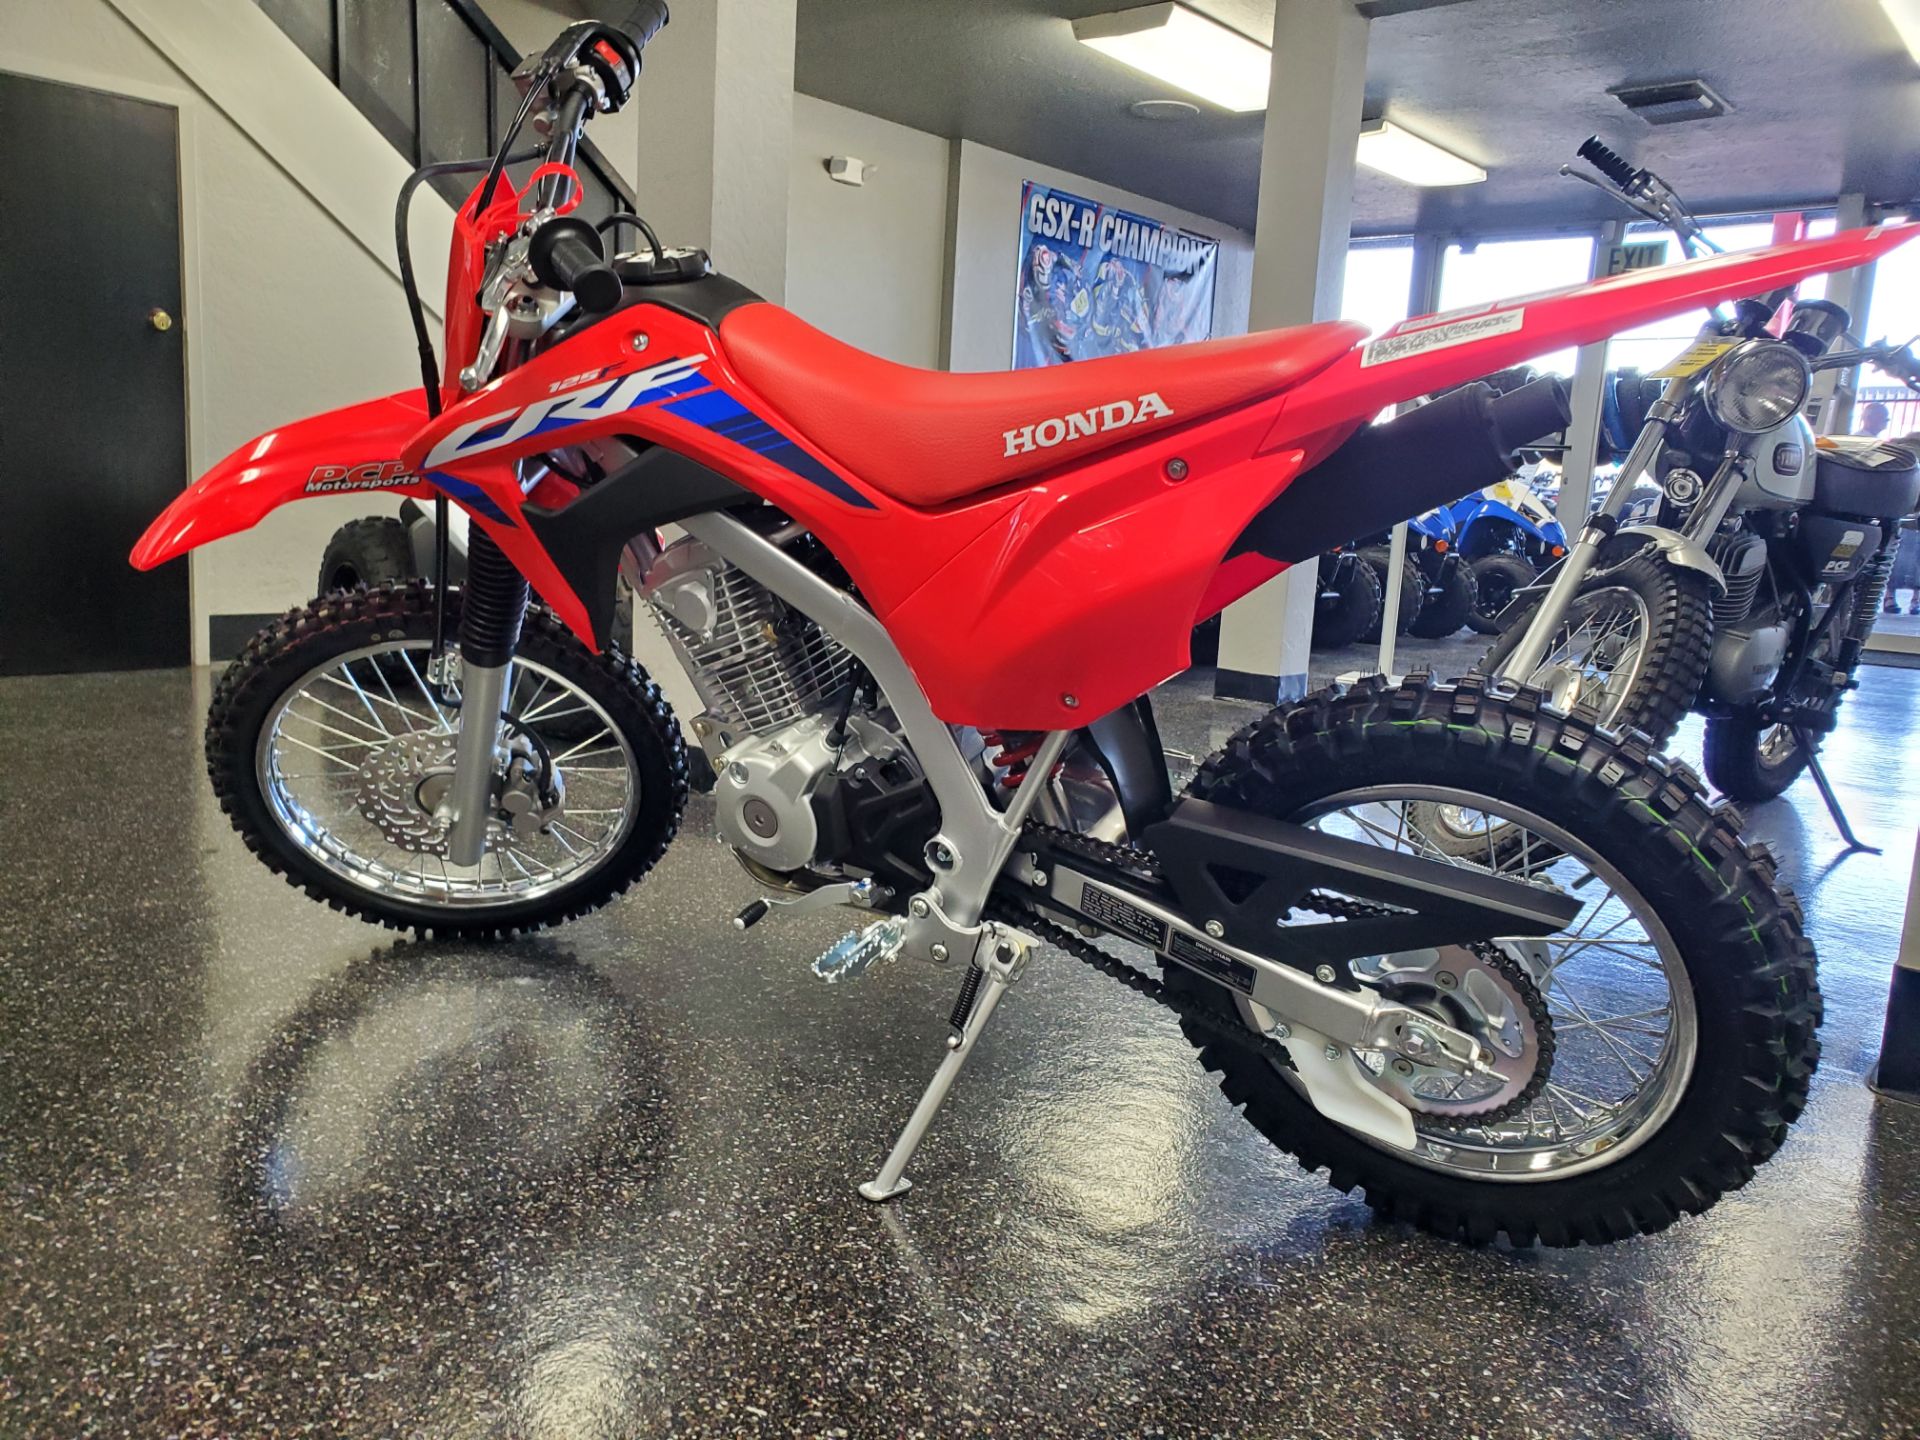 New 2023 Honda CRF125F Motorcycles in Sacramento, CA Stock Number 900524